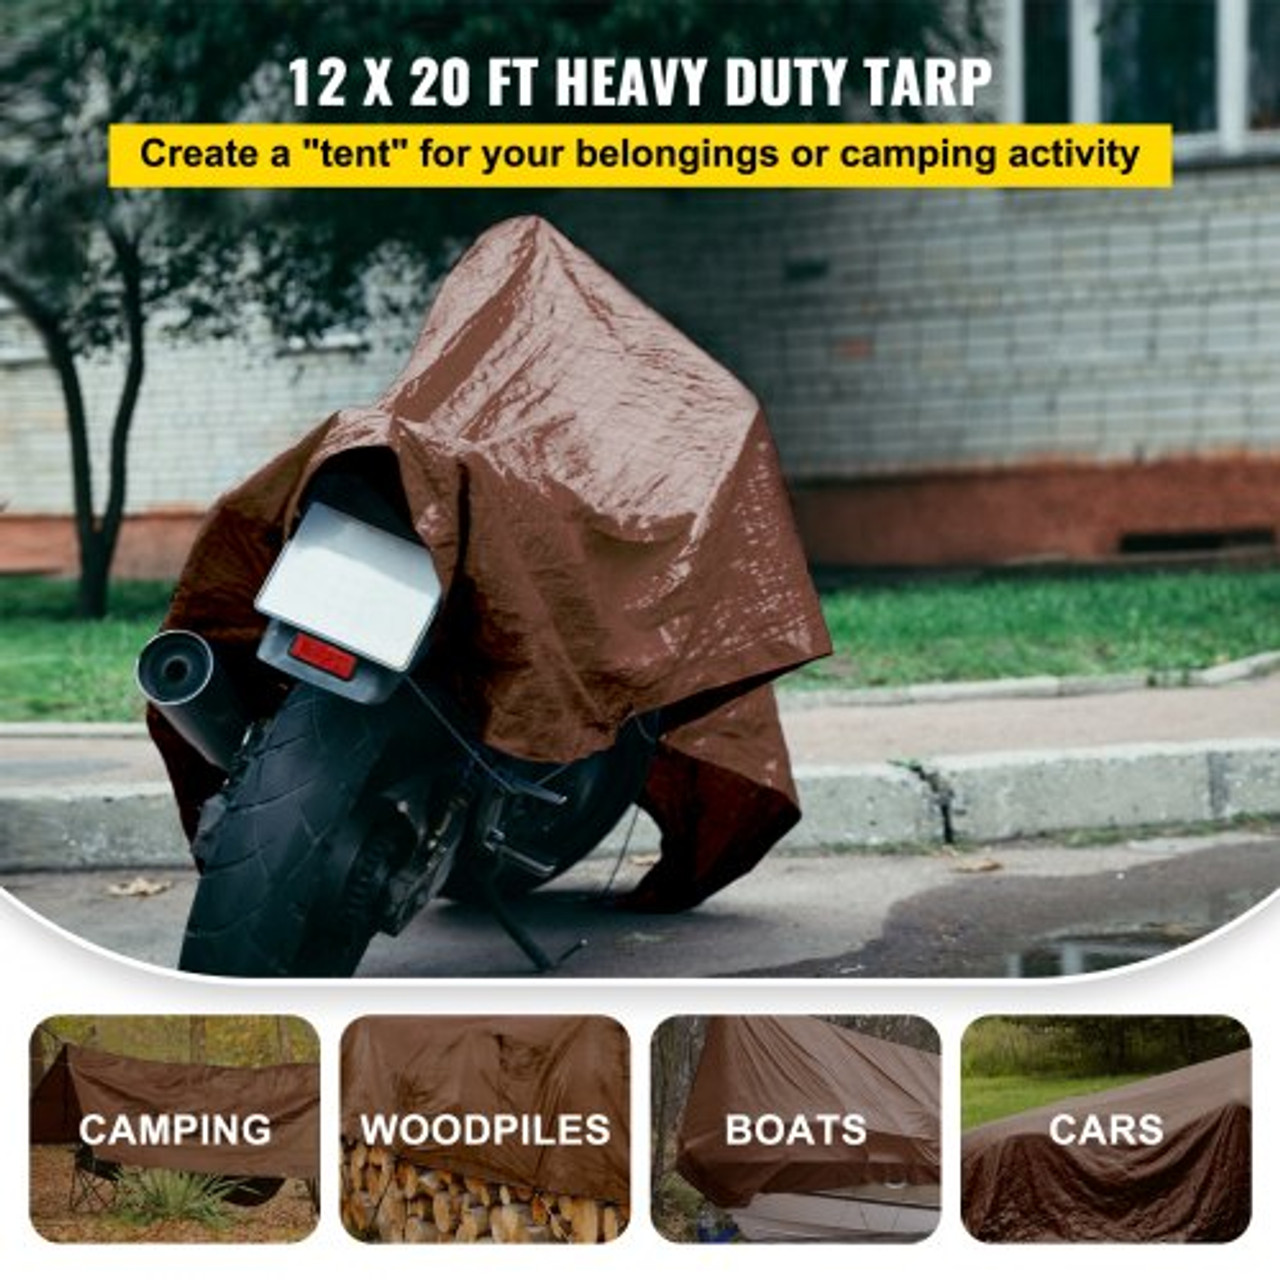 Heavy Duty Tarp, 12 x 20 ft 16 Mil Thick, Waterproof & Sunproof Outdoor Cover, Rip and Tear Proof PE Tarpaulin with Grommets and Reinforced Edges for Truck, RV, Boat, Roof, Tent, Camping, Brown